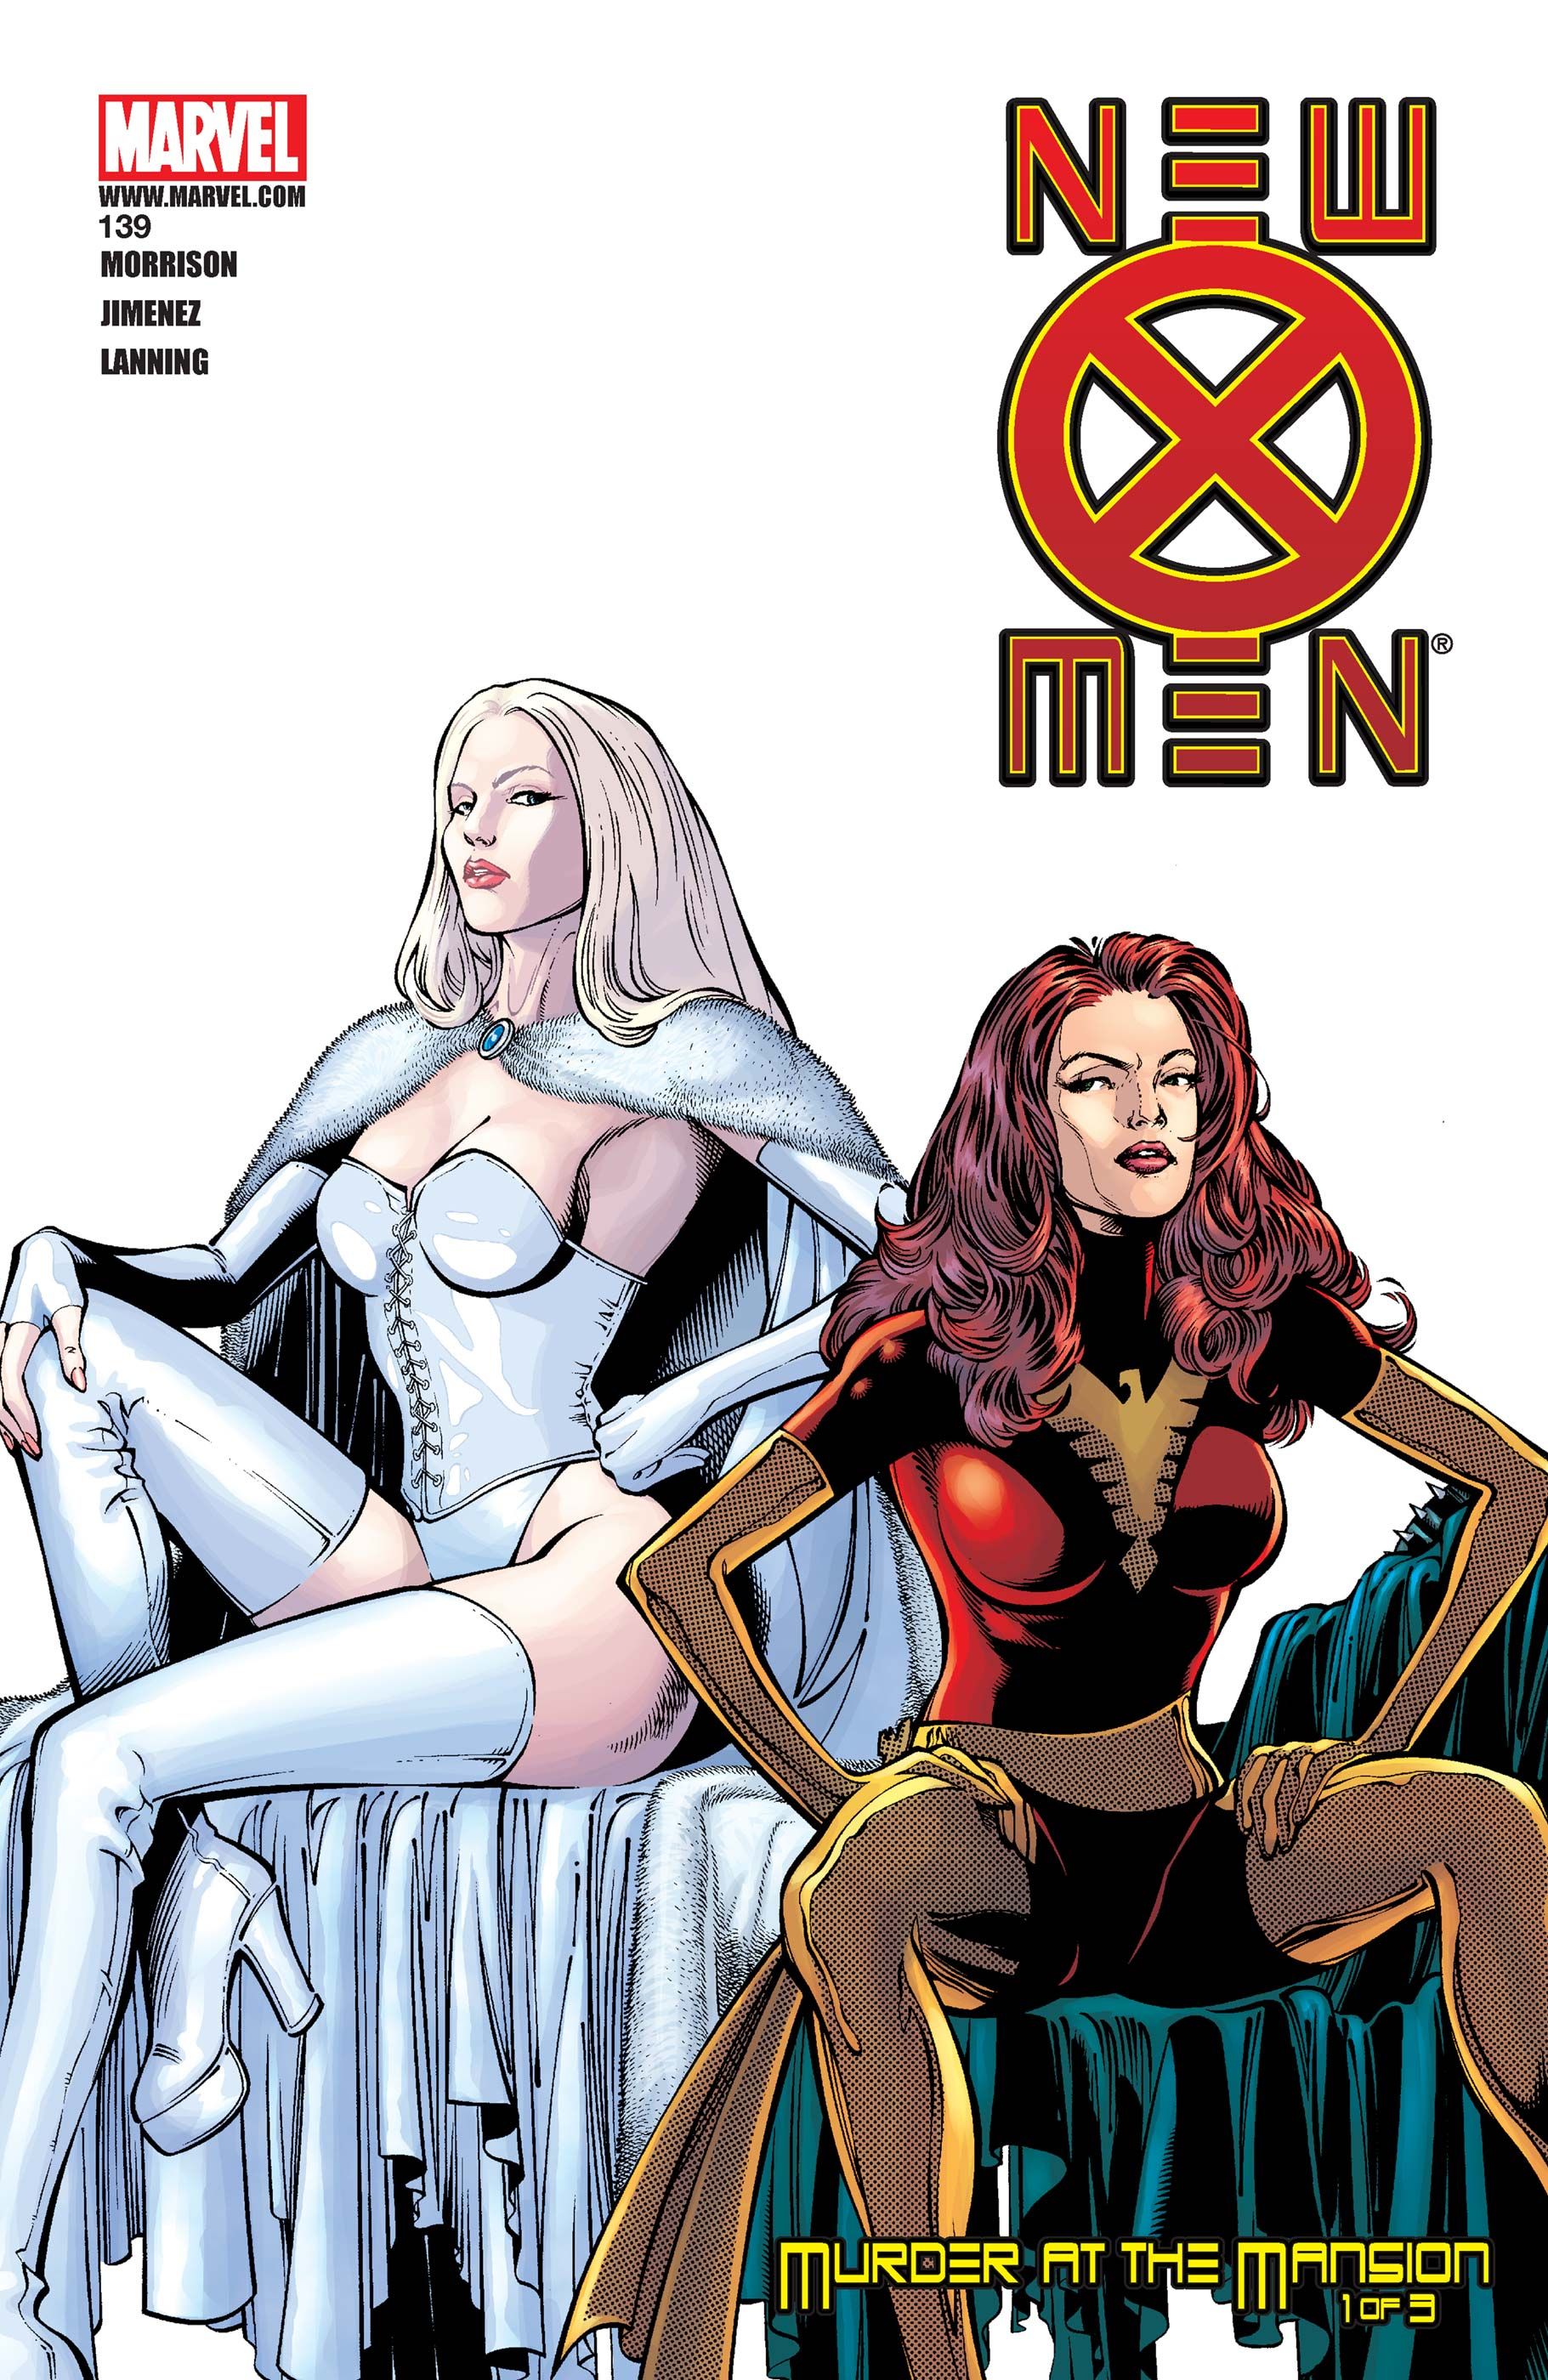 Emma Frost and Jean Grey as Dark Phoenix on Phil Jiminez's cover to New X-Men #139